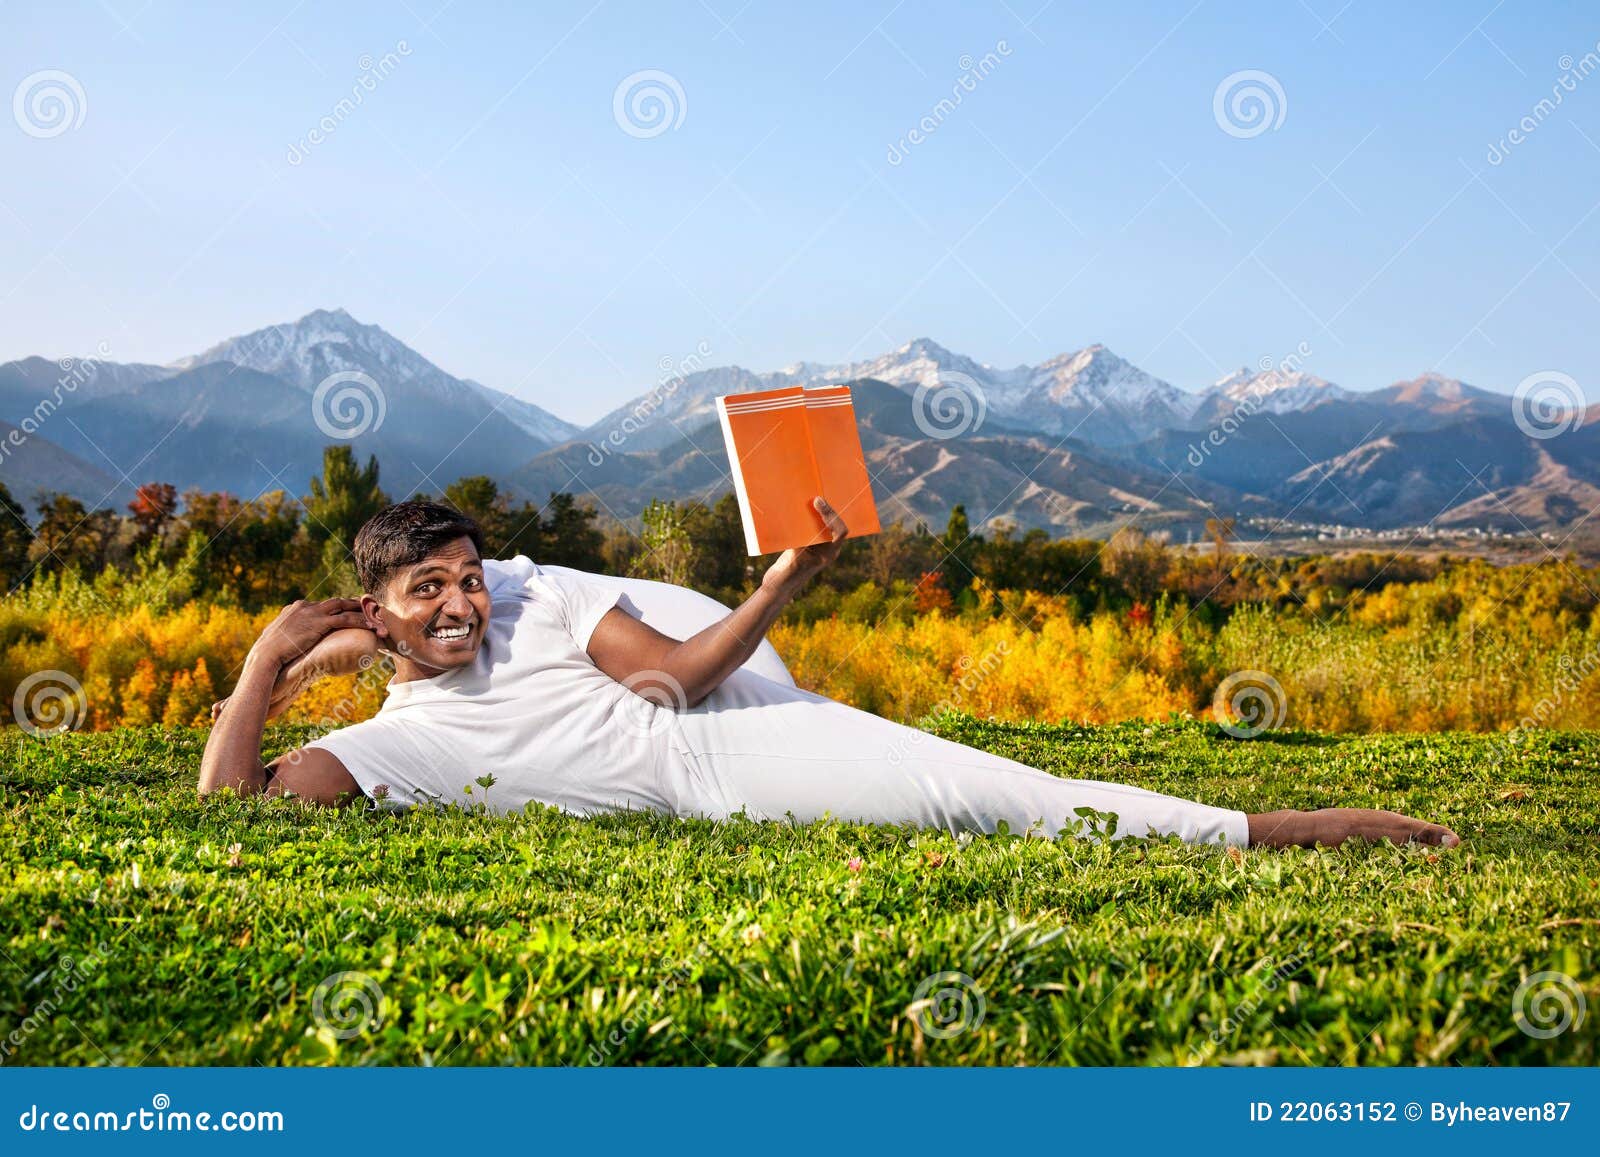 POSE(fullbody pose + sitting, reading a book) | Stable Diffusion